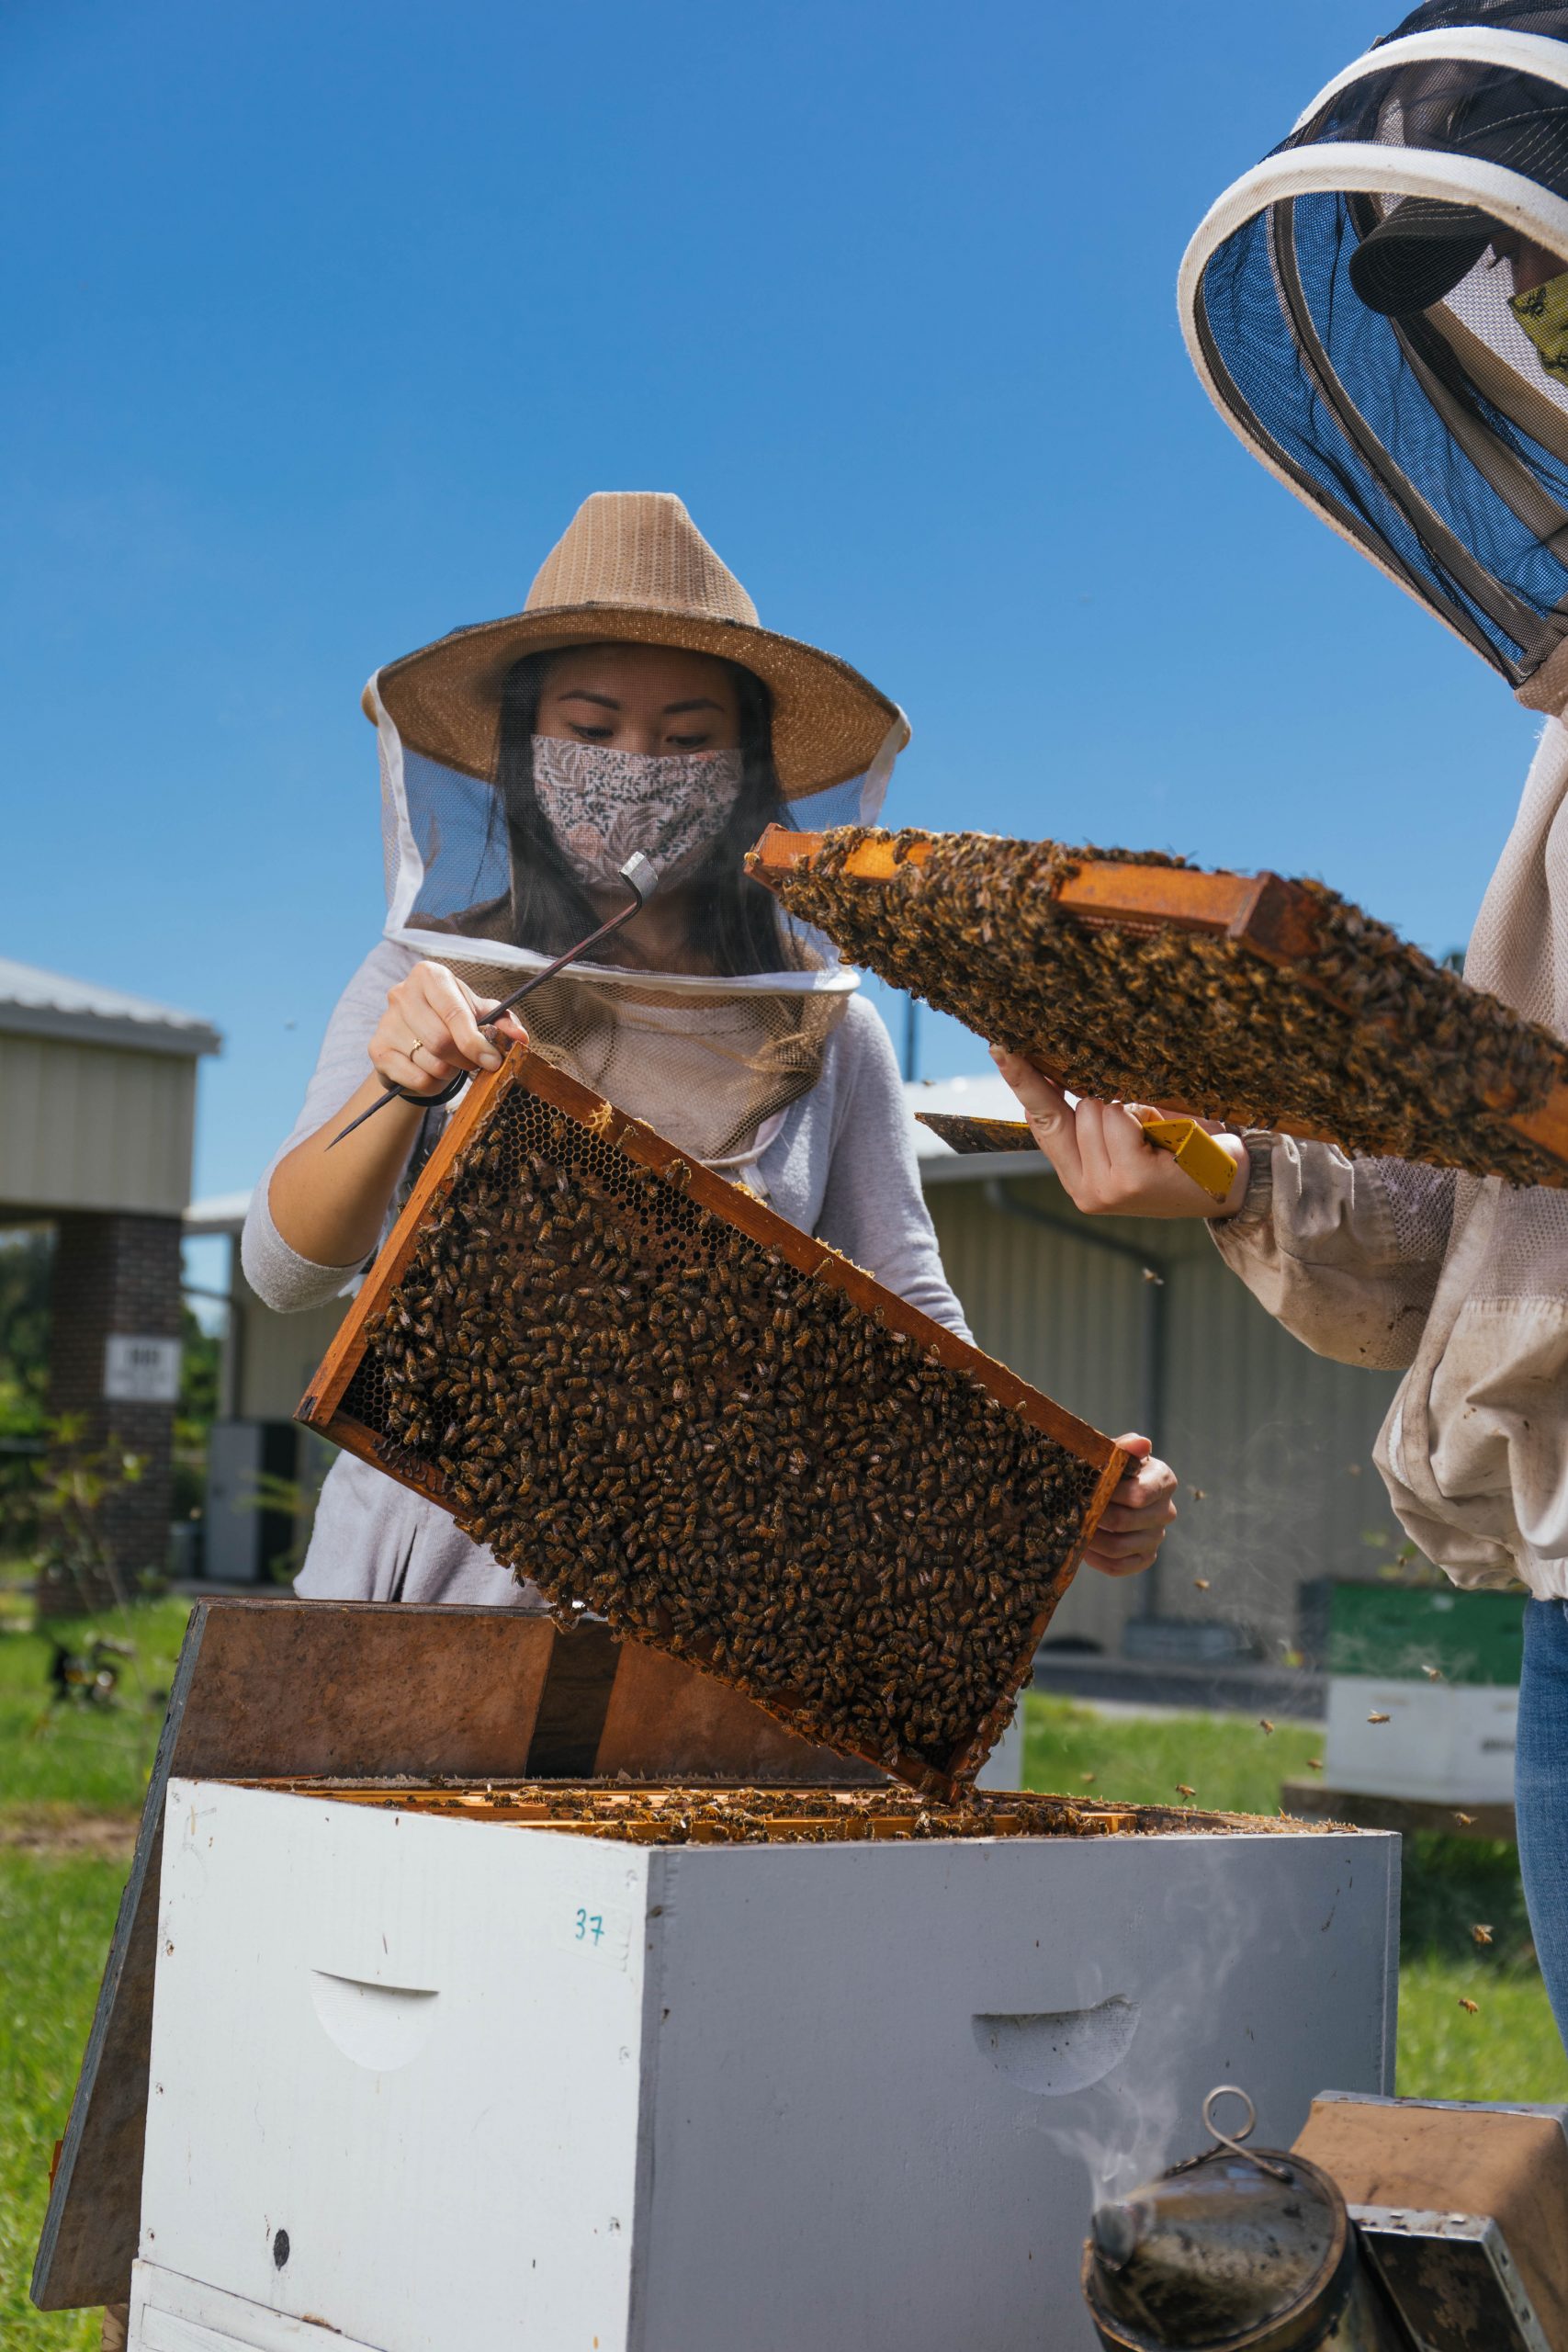 A woman works on a bee hive as part of her schooling